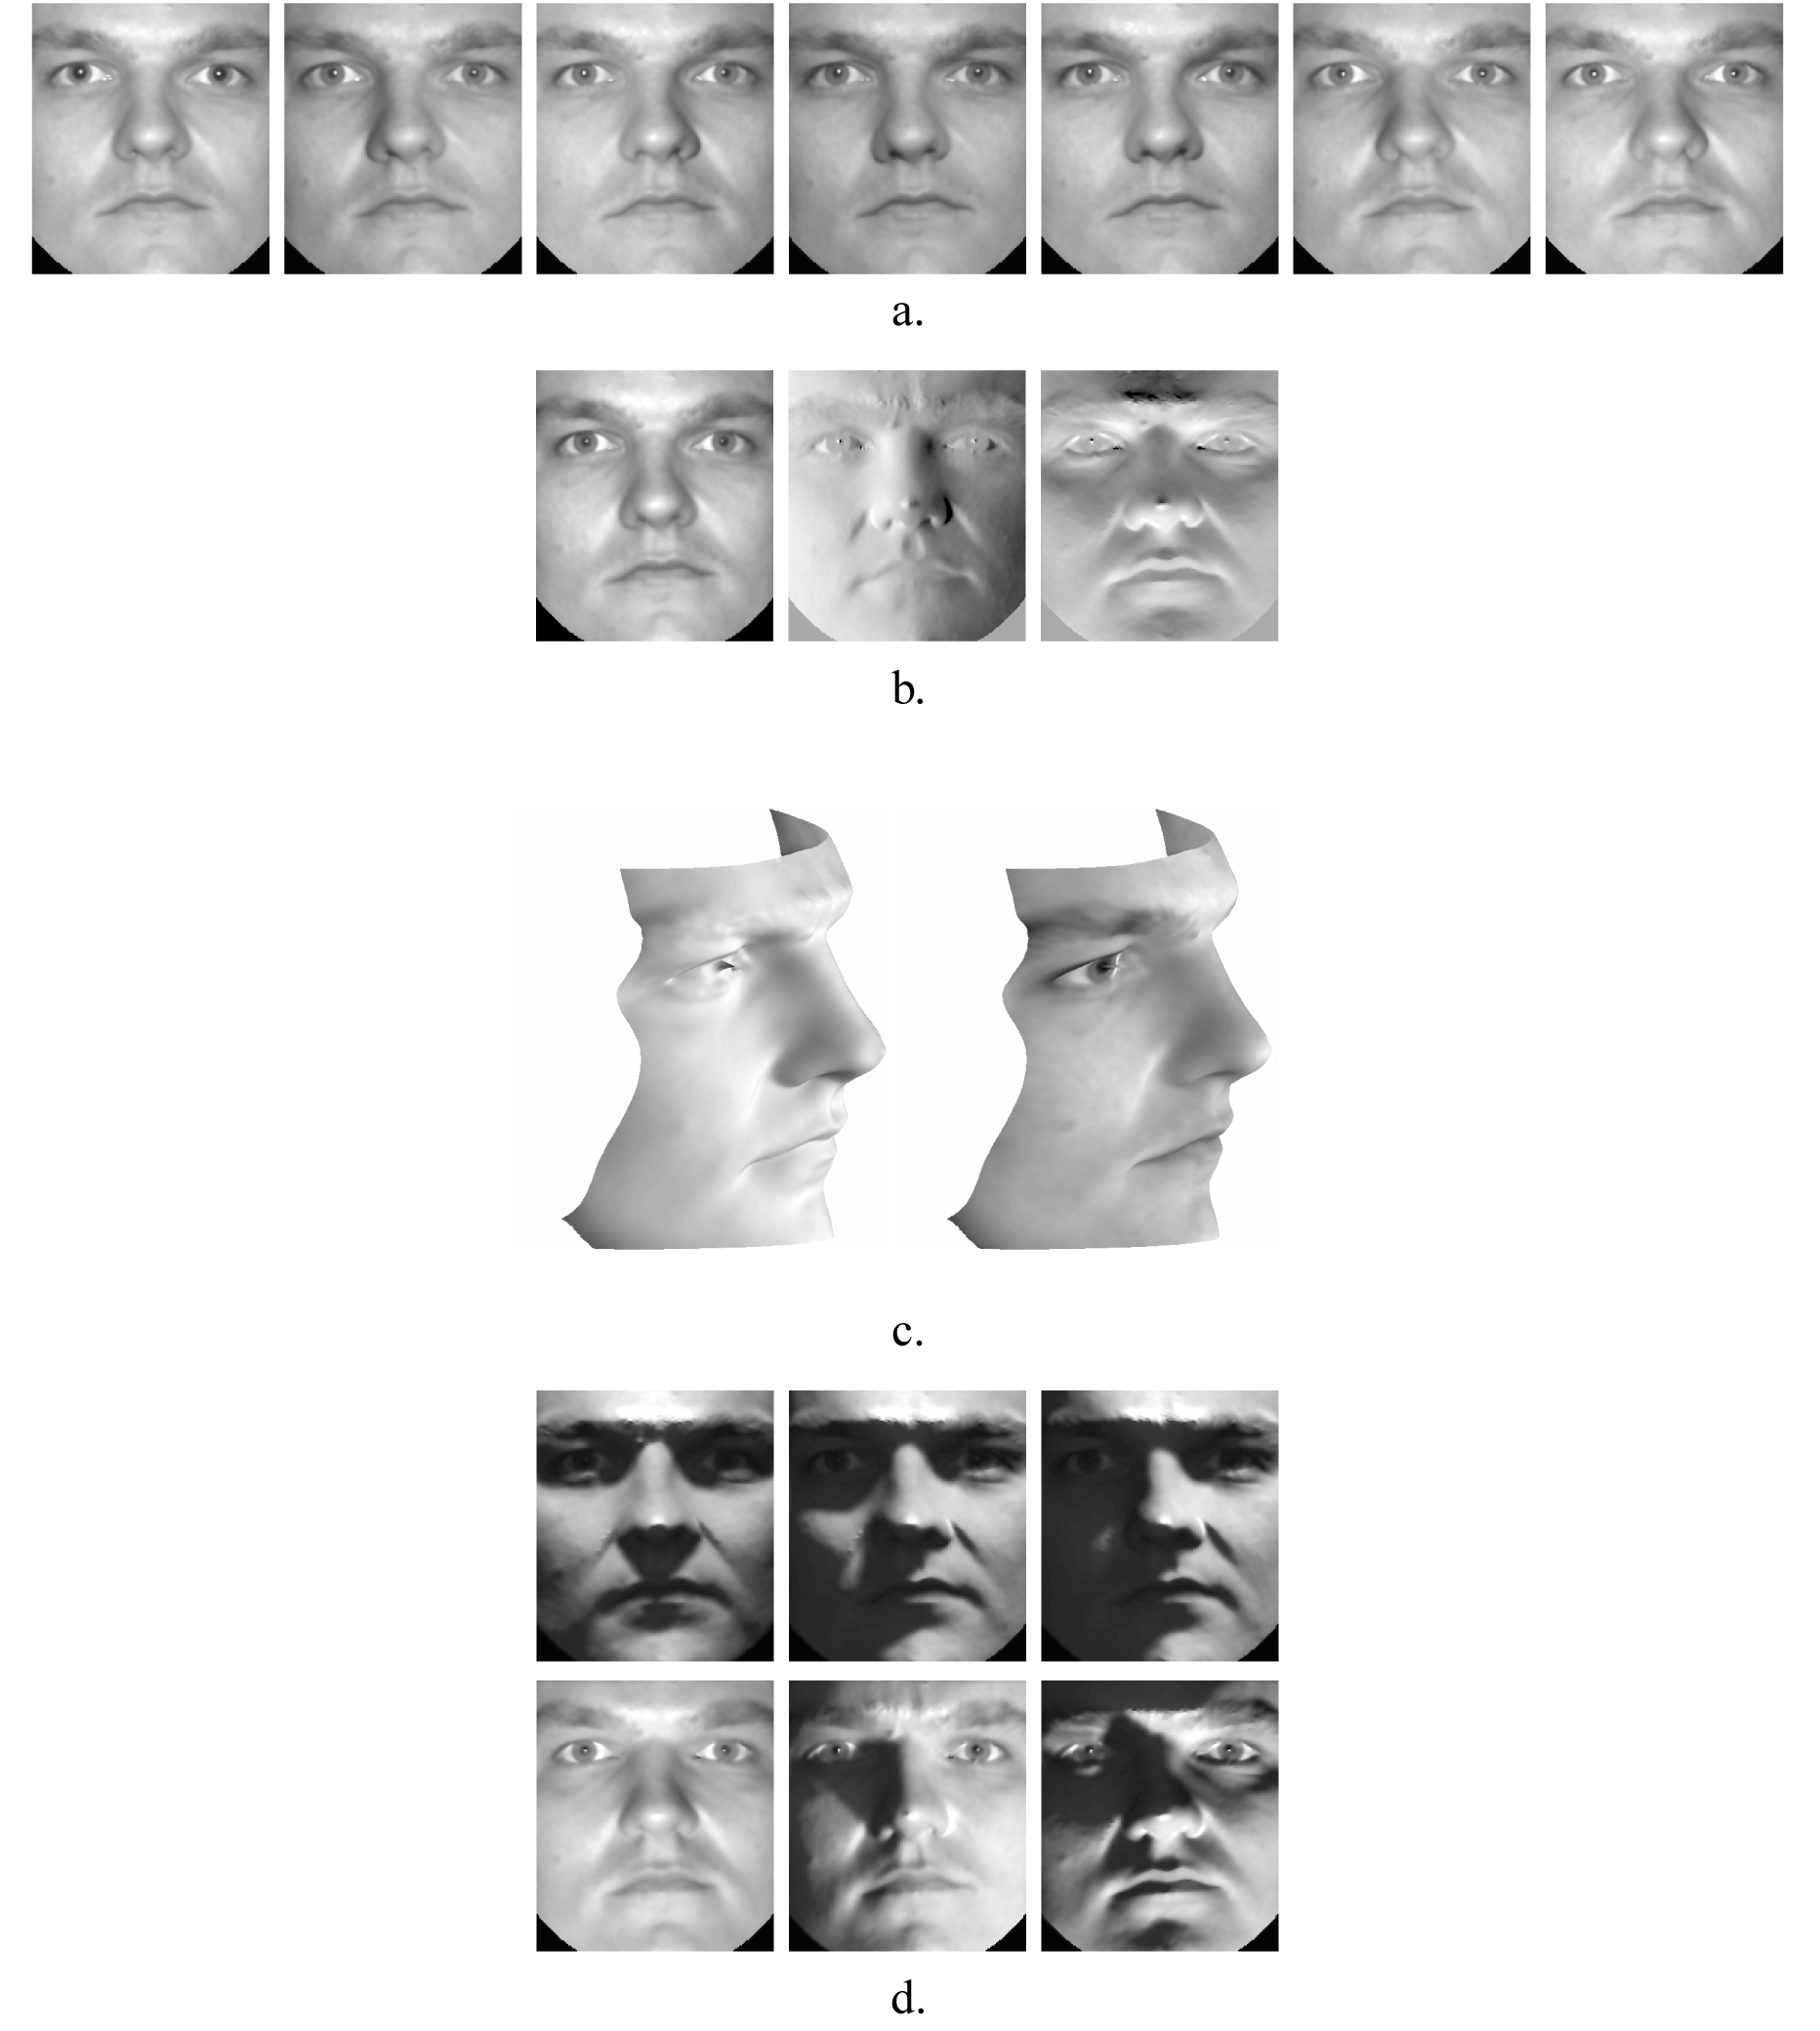 Illuminating faces using Illumination cones. First row (a): Input dataset, Second row (b): Basis Images, Third and Fourth row (d): Relit Faces , . Original image source: Athinodoros S. Georghiades, Peter N. Belhumeur, and David J. Kriegman, From few to many: Illumination cone models for face recognition under variable lighting and pose, IEEE Trans. Pattern Anal. Mach. Intell. 23(2001), no. 6, 643-660. ©2001 IEEE